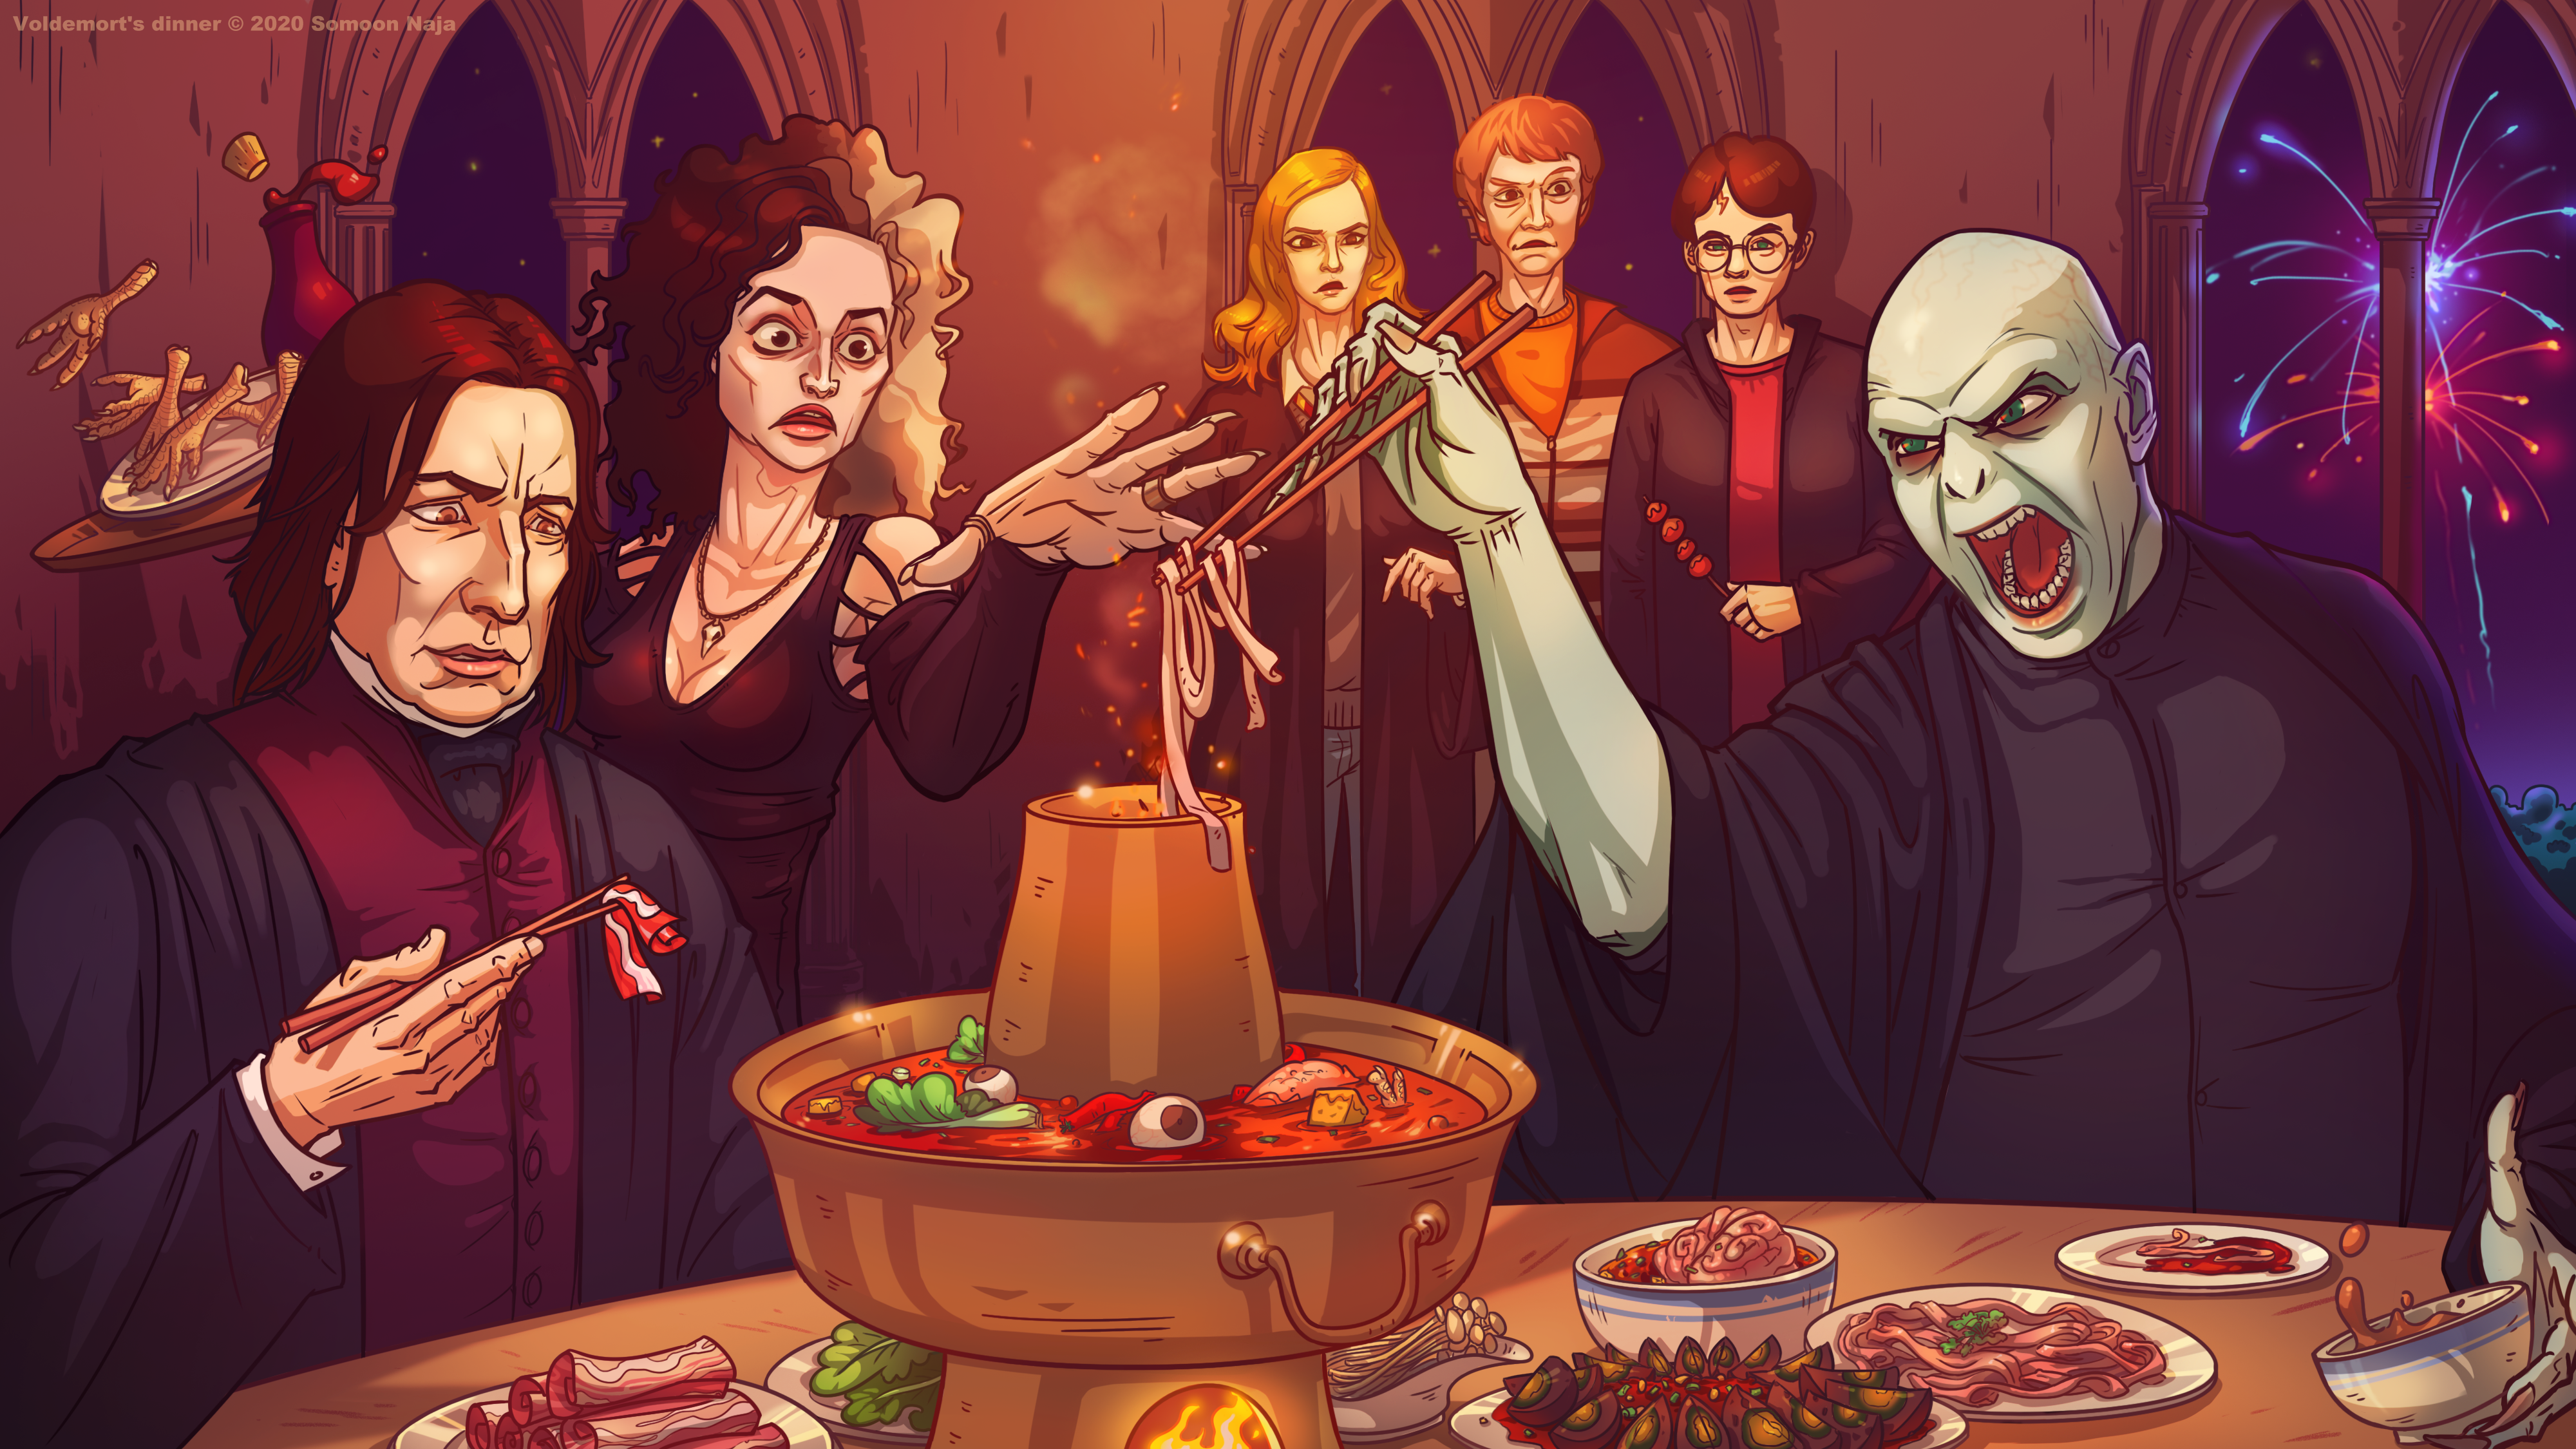 General 4000x2250 Lord Voldemort artwork Hermione Granger food book characters table chopsticks Ron Weasley watermarked Harry Potter 2020 (Year) Severus Snape Bellatrix Lestrange teeth open mouth fireworks two tone hair plates night cup drink tray dress cleavage necklace